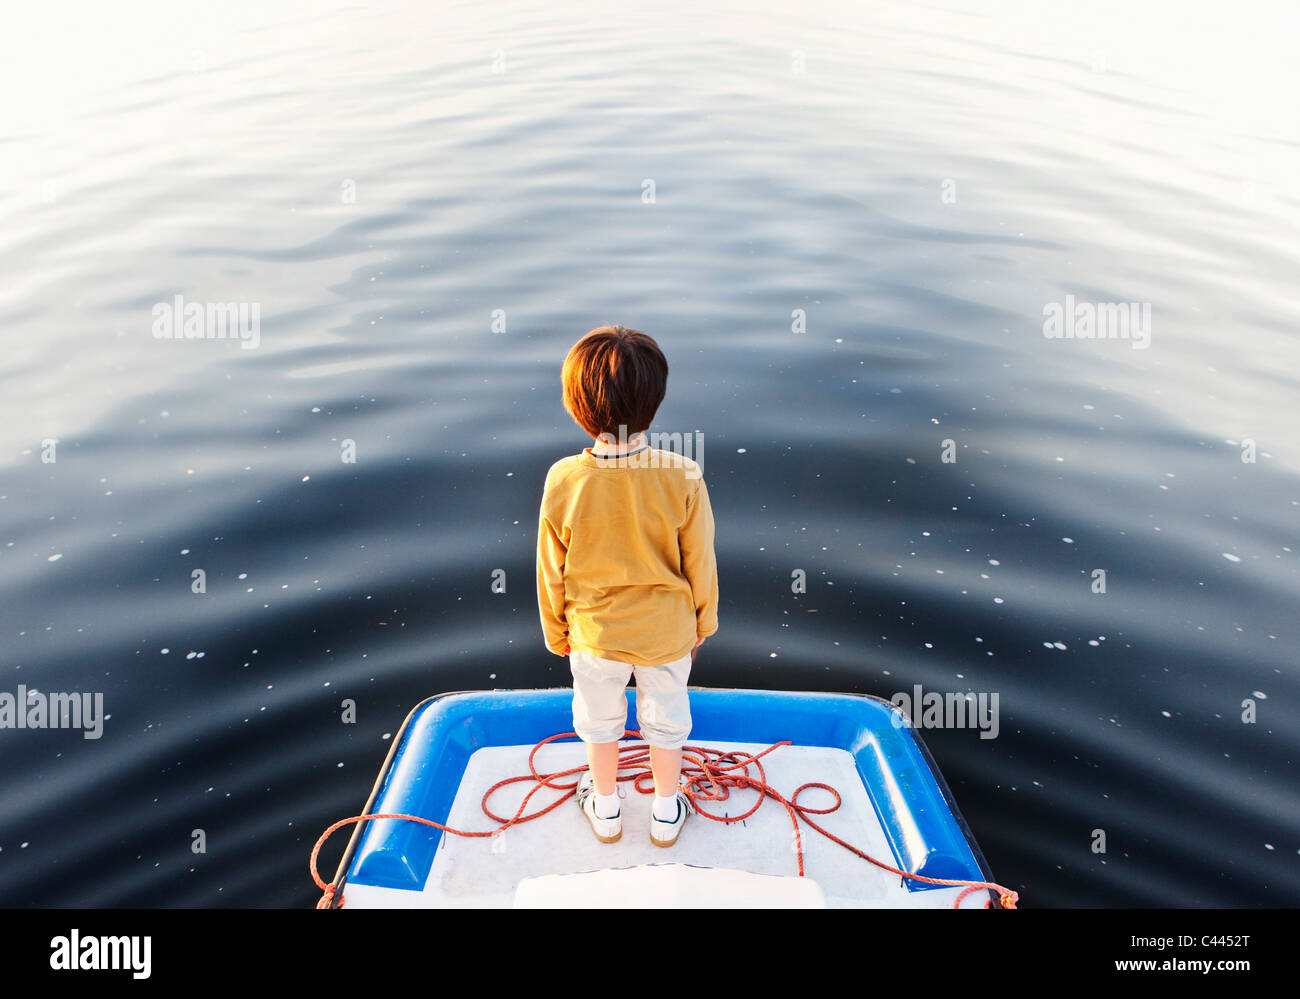 A boy standing at the edge of a floating jetty Stock Photo